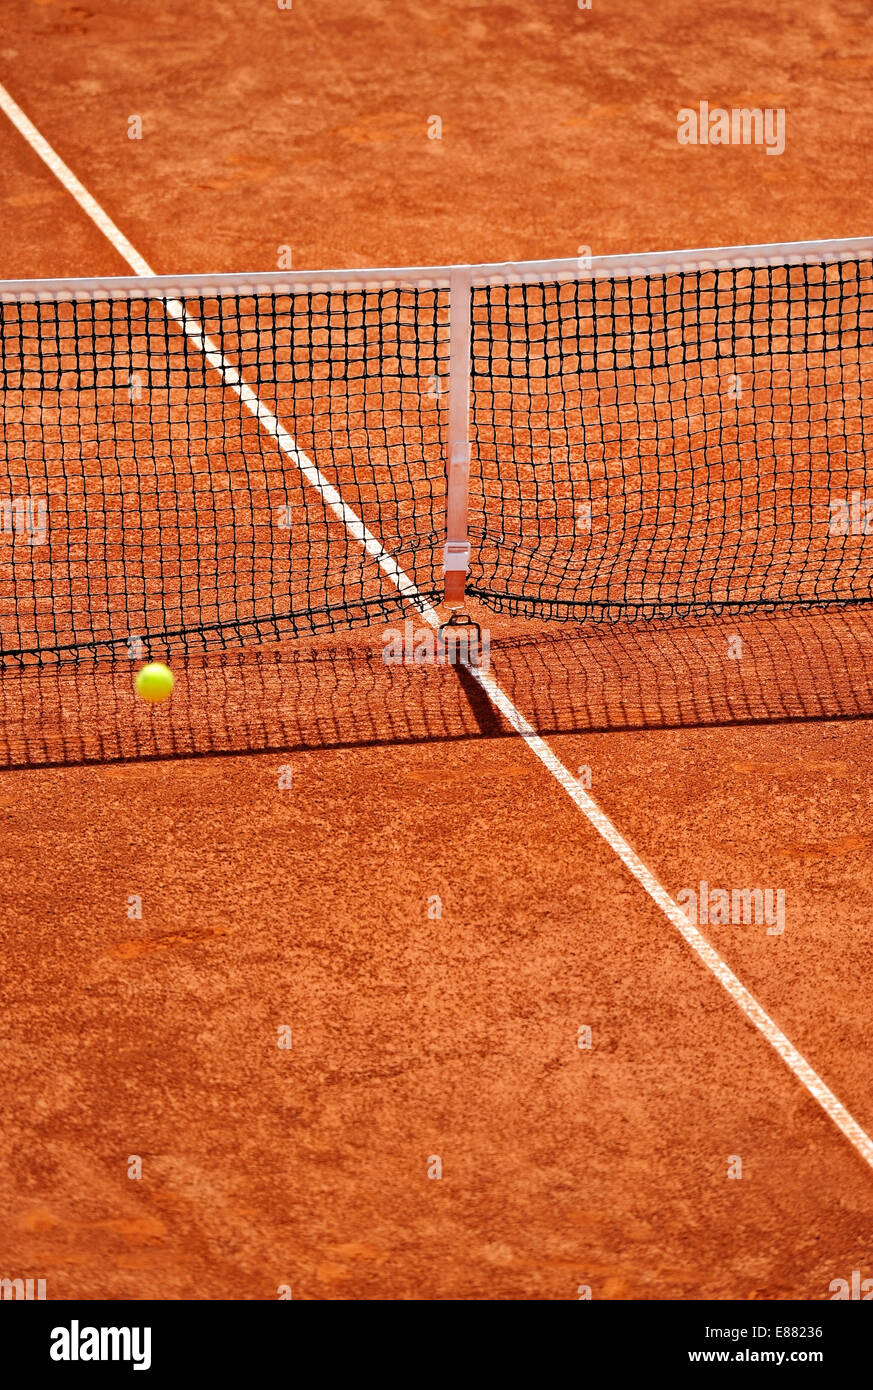 Tennis net detail on a clay court during a match Stock Photo